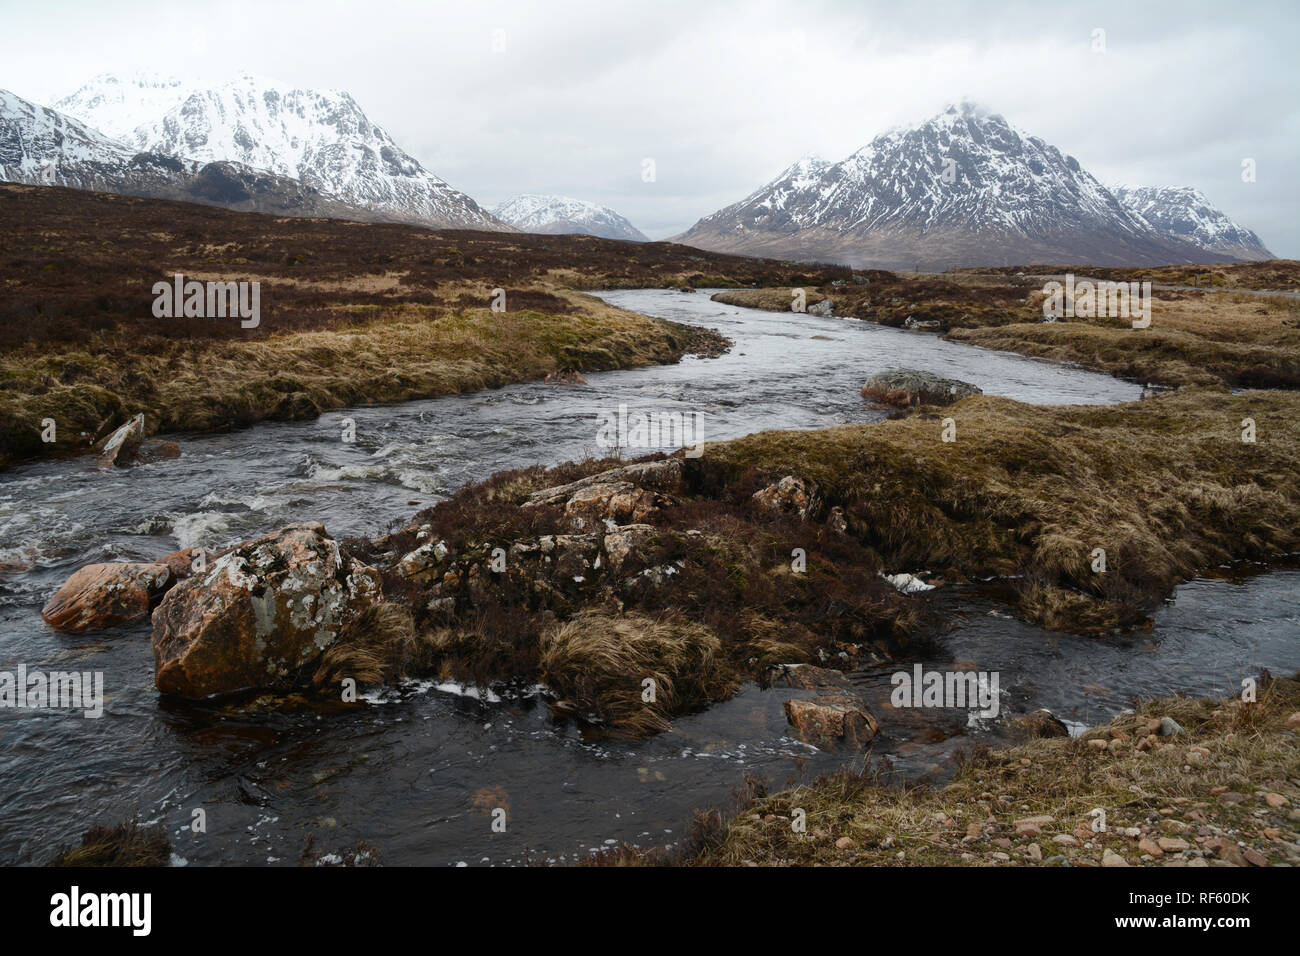 The River Etive with Buachaille Etive Mor and snowy peaks of the Scottish Highlands in the background, Glencoe region, Scotland, United Kingdom. Stock Photo